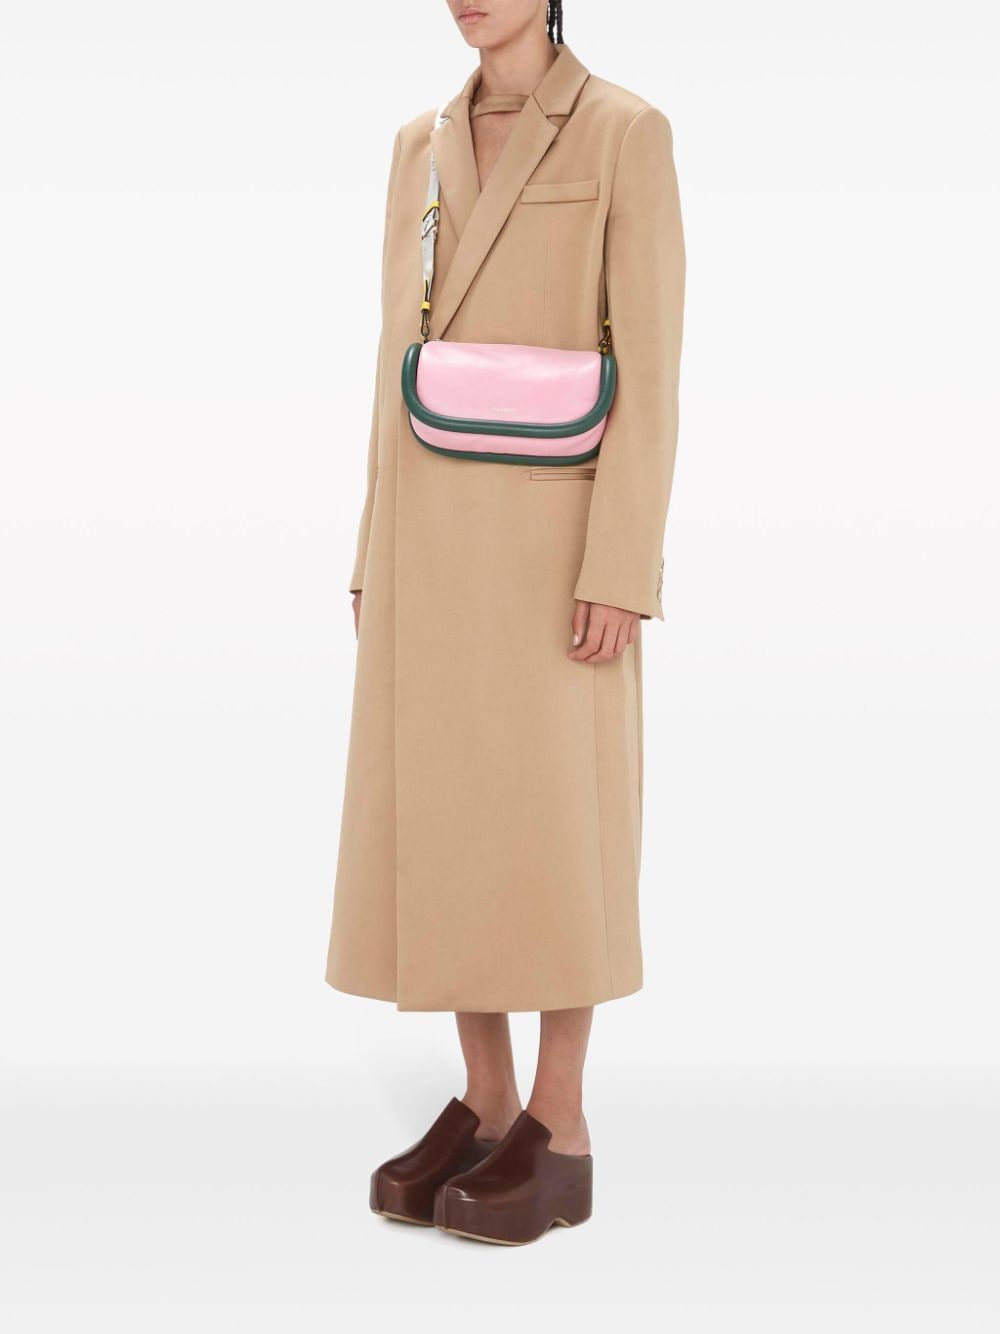 Image 2 of JW Anderson Bumper 15 leather crossbody bag